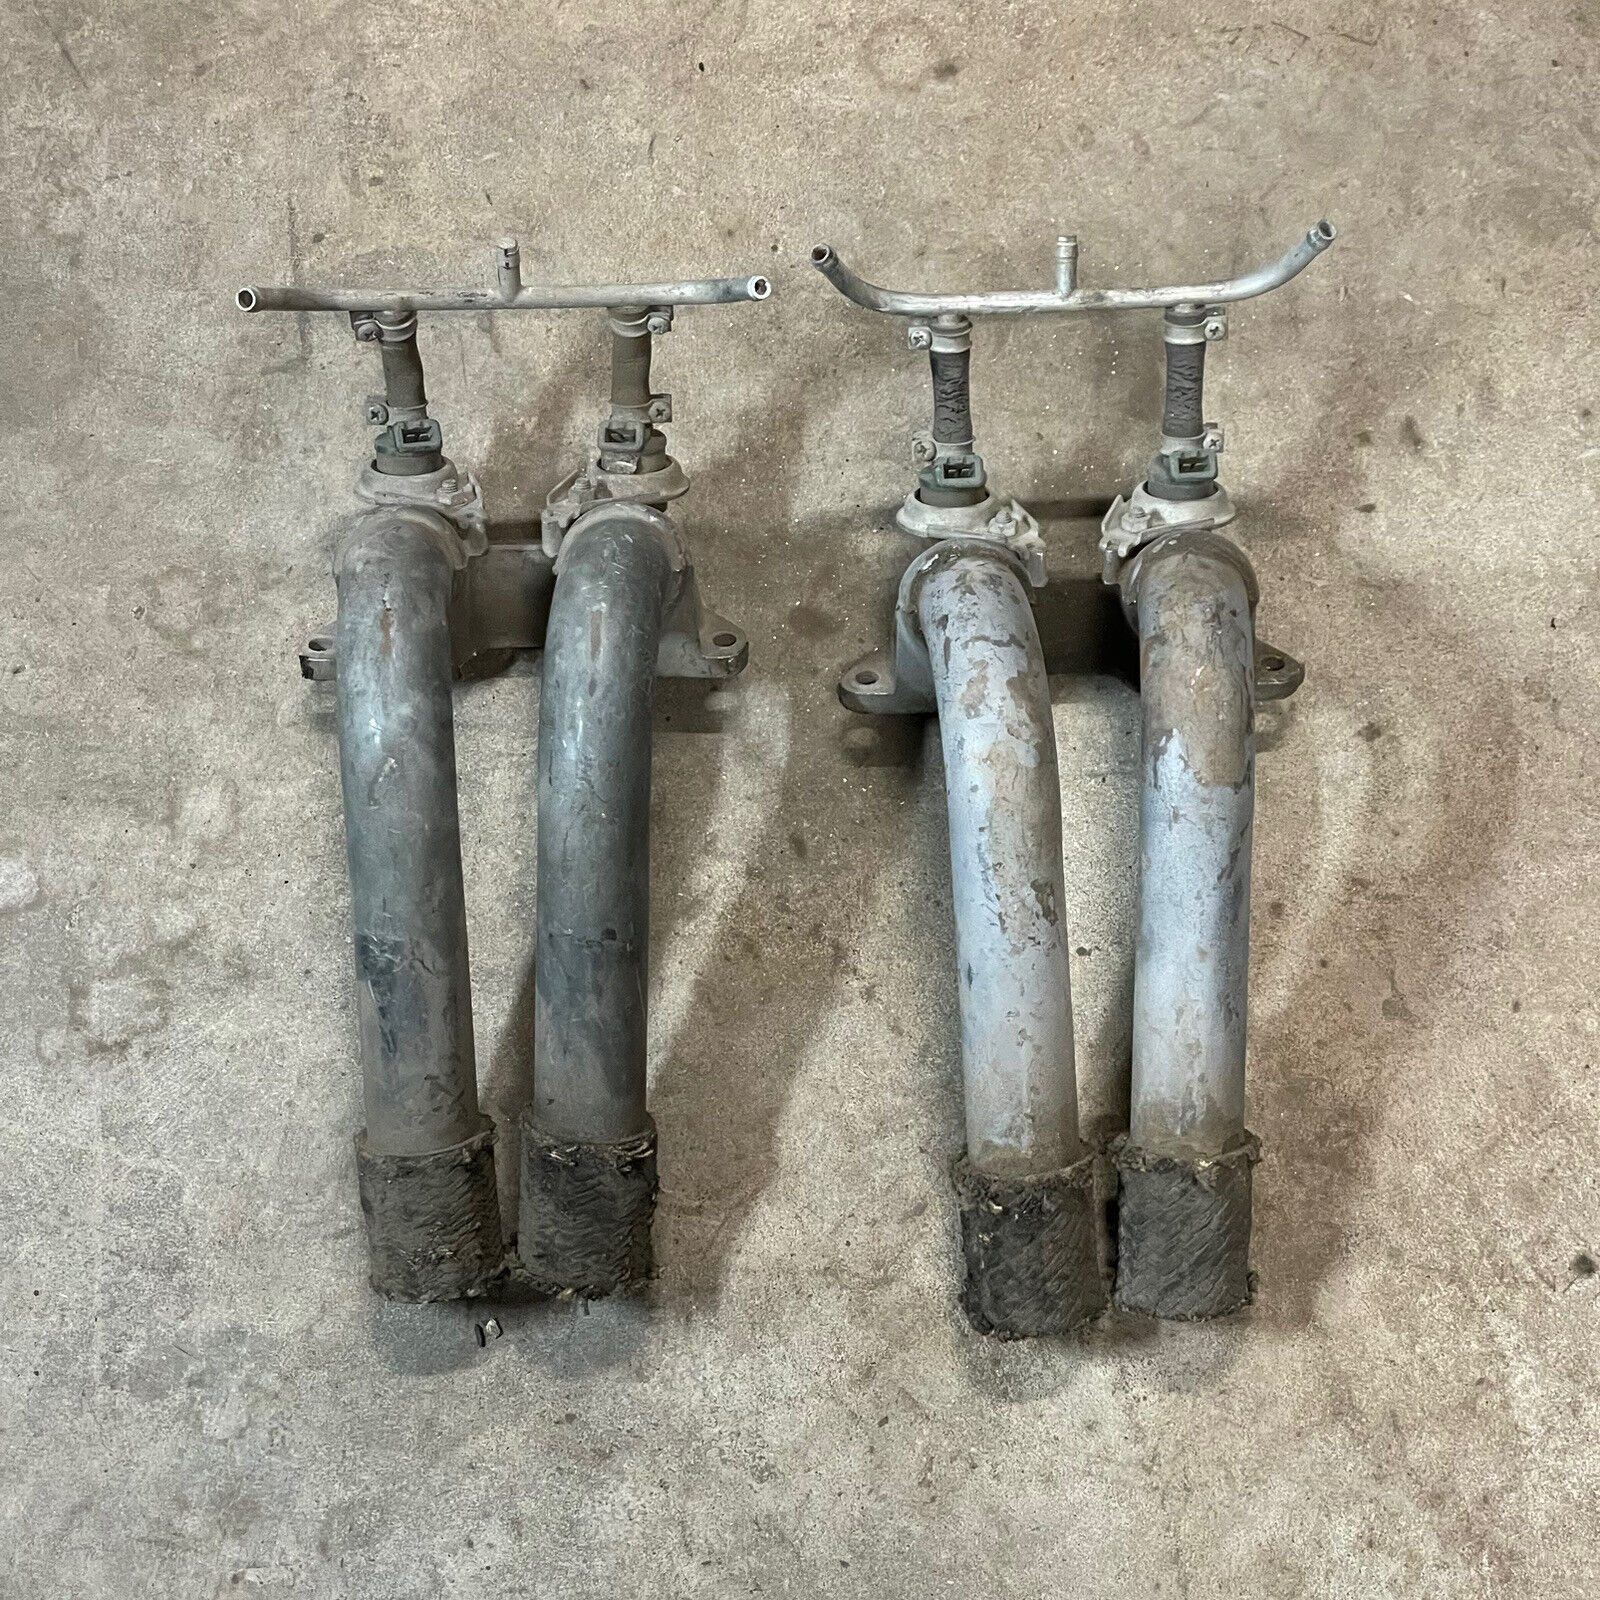 Porsche 914 2.0L Fuel Injection Intake Manifold Runners Injectors Pair TYPE 4